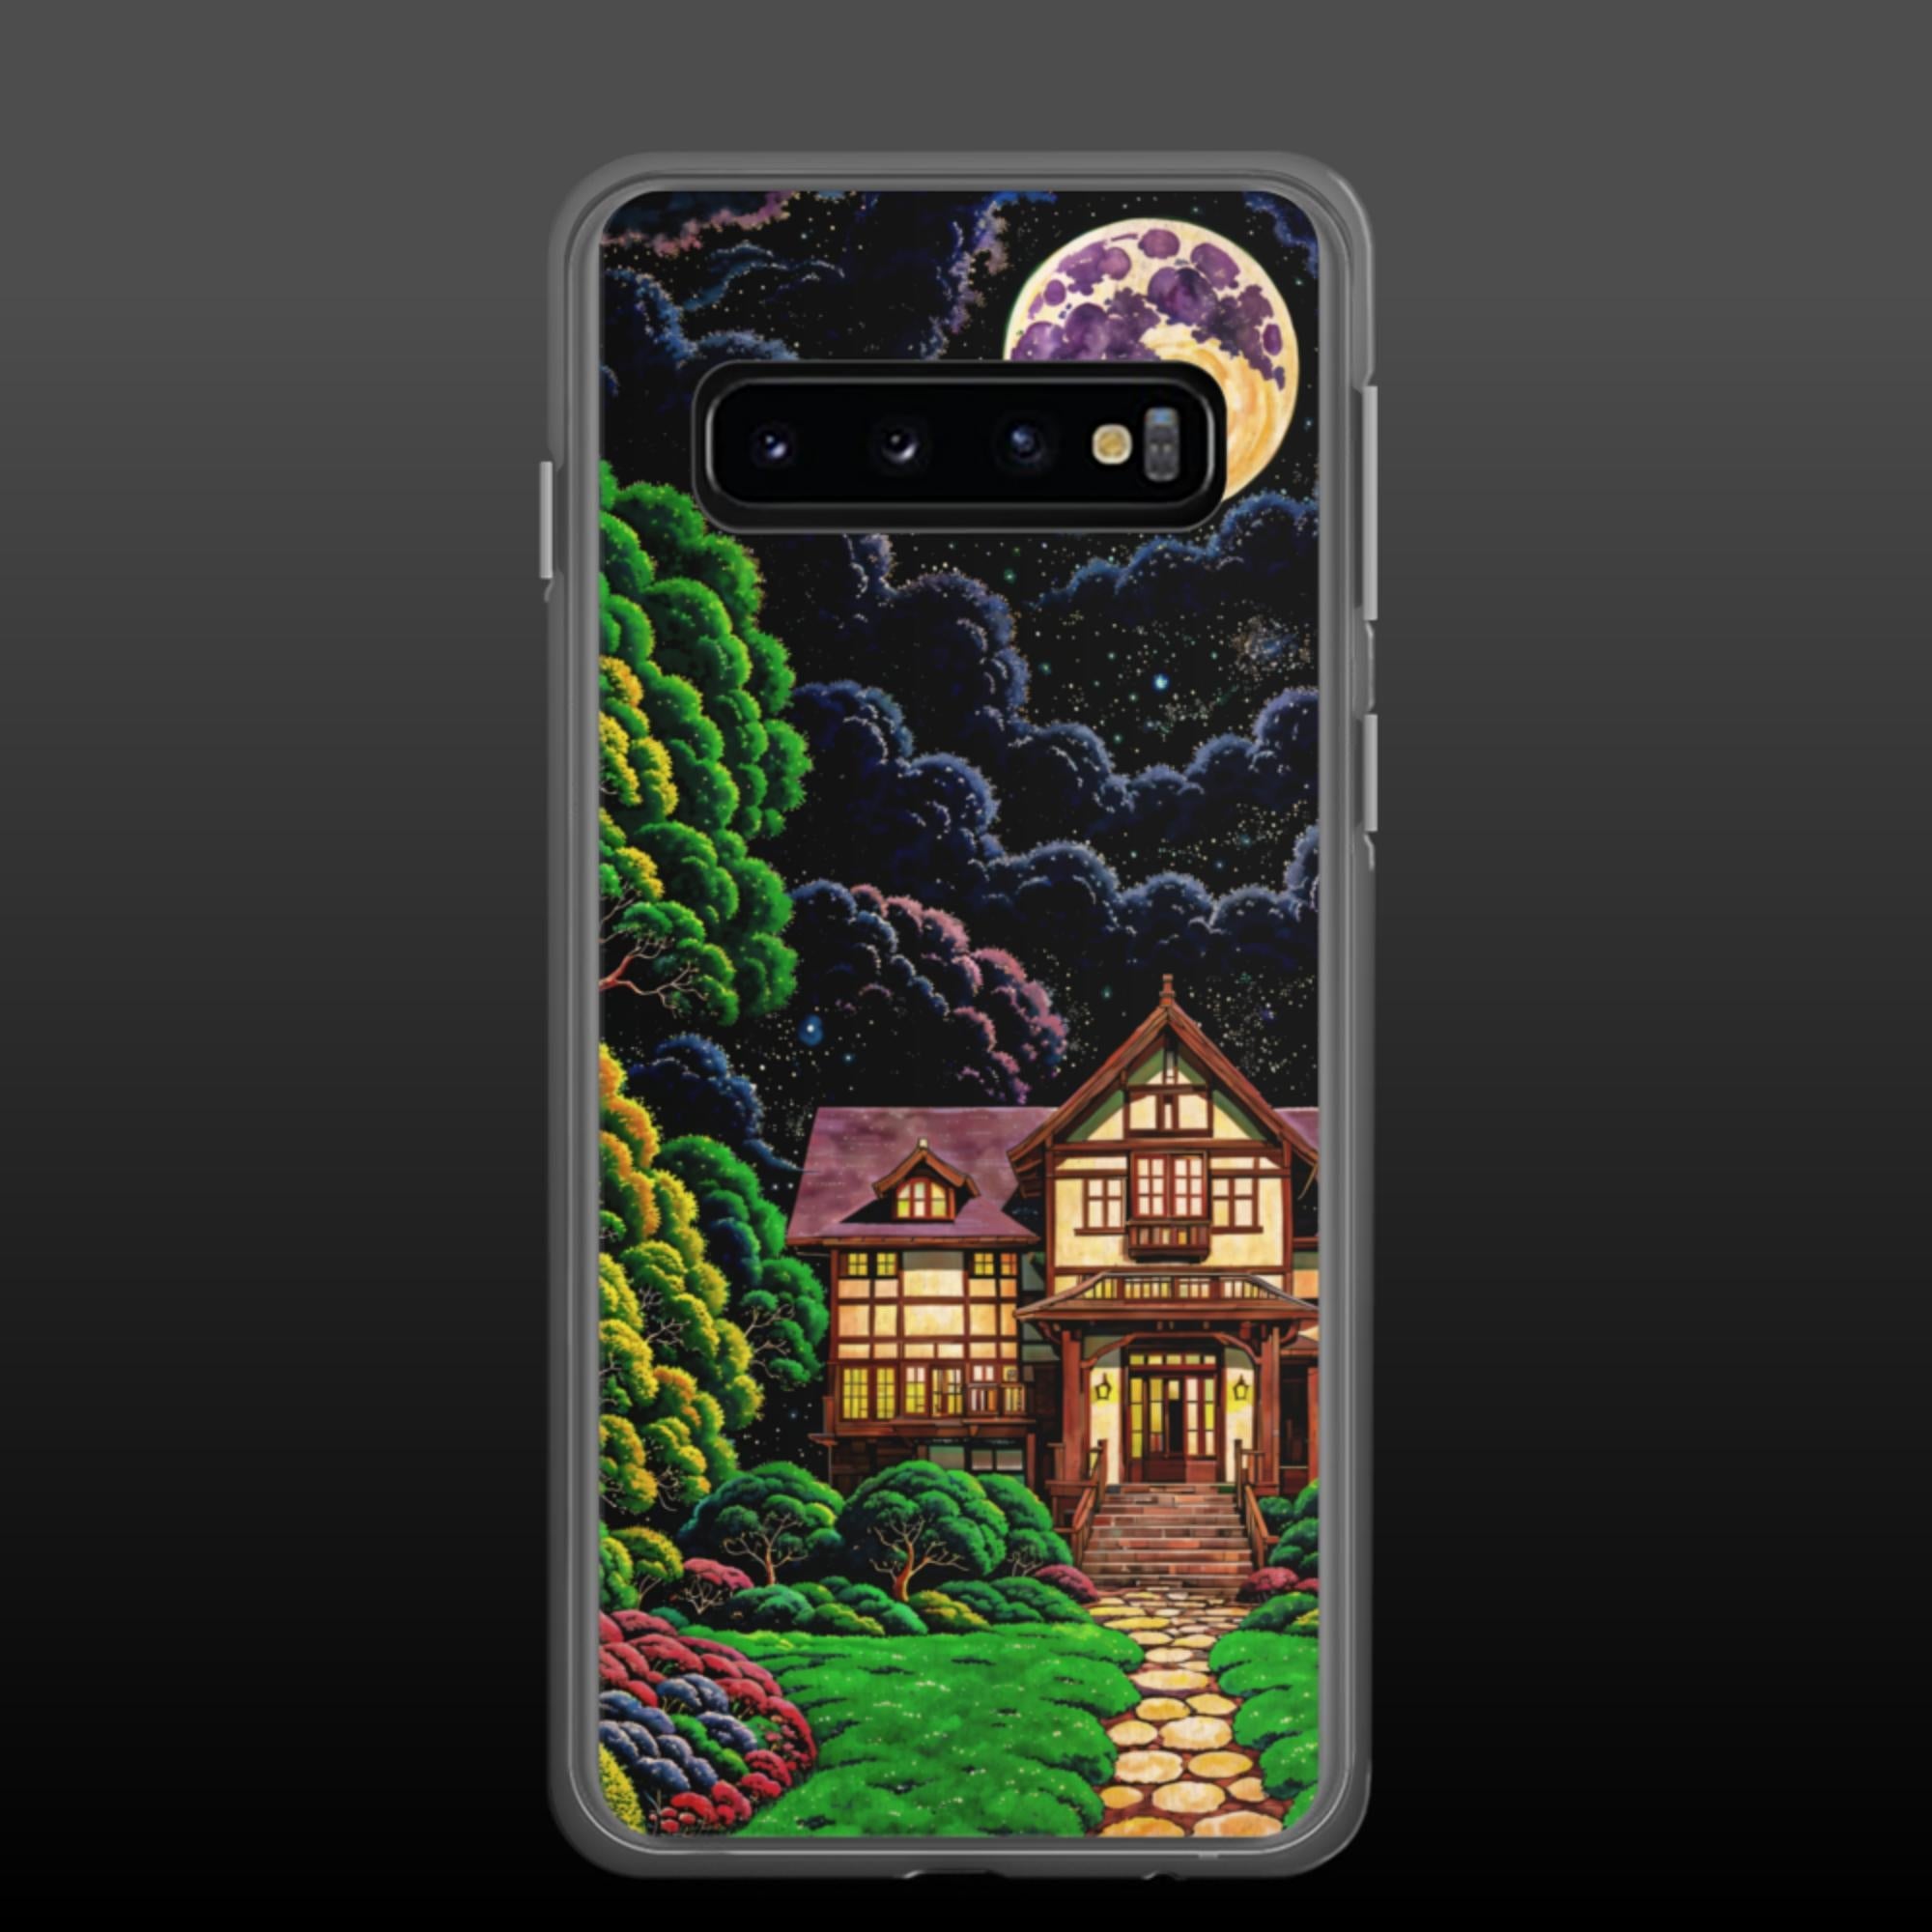 "Moonlight mansion" clear samsung case - Clear samsung case - Ever colorful